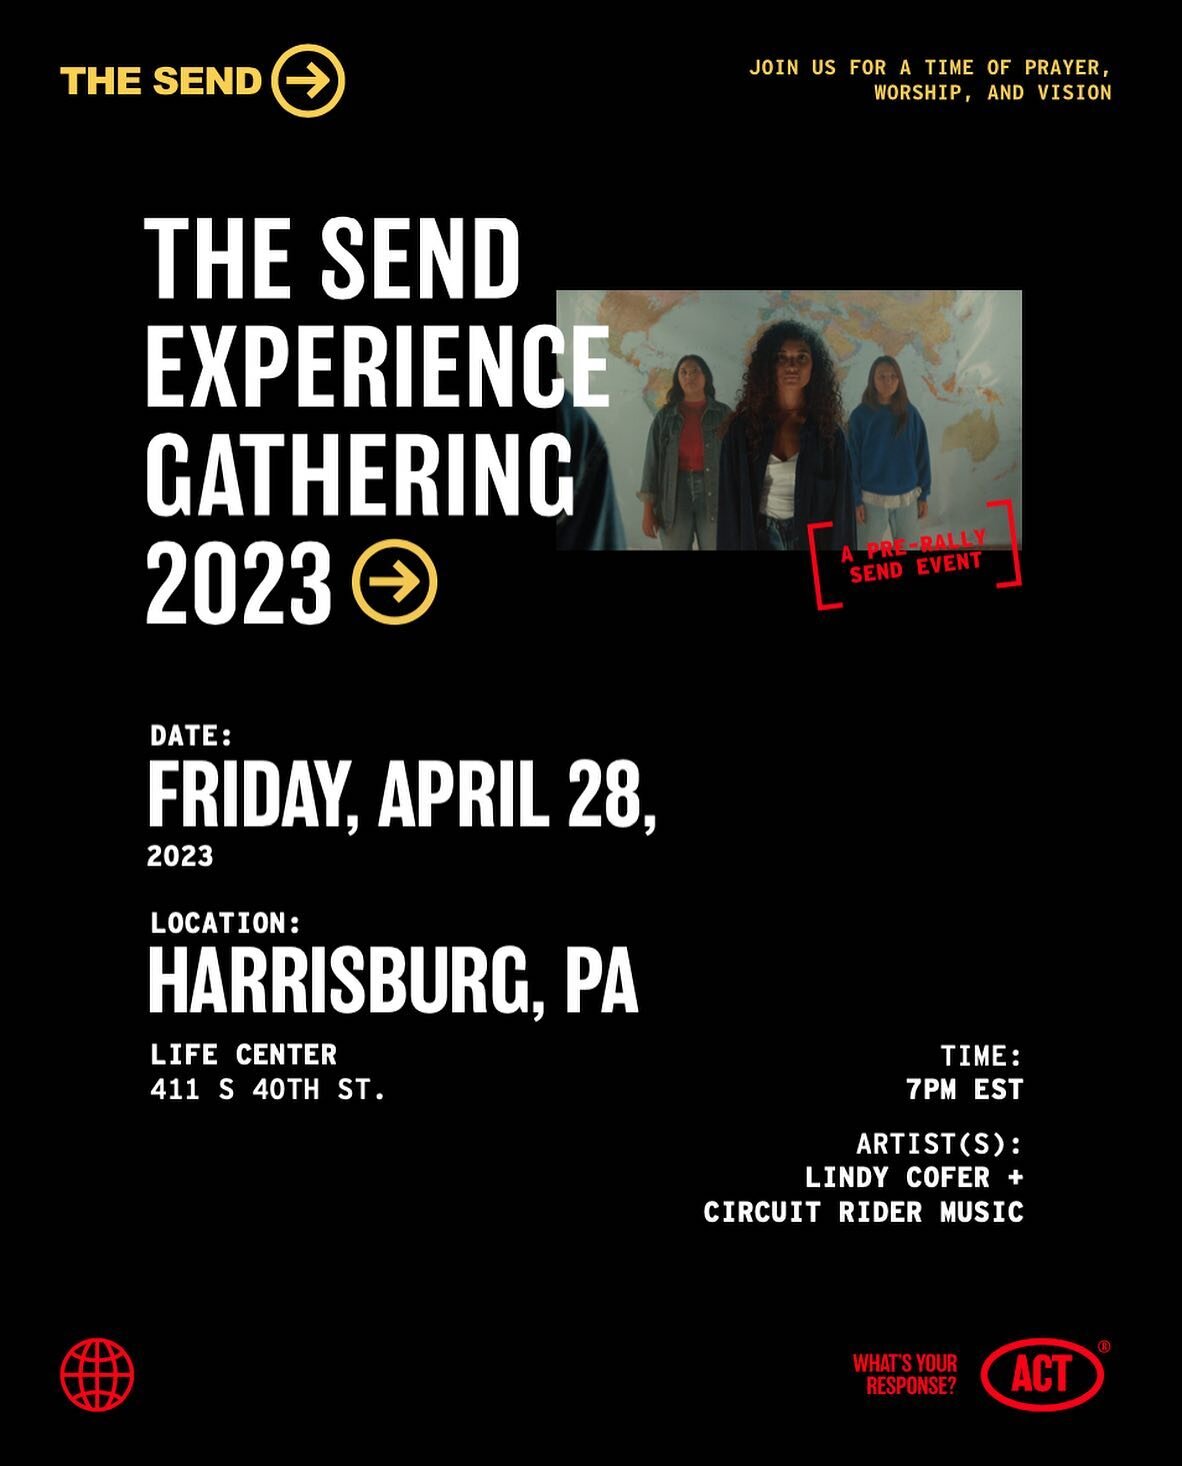 FRIDAYFRIDAYFRIDAYFRIDAY

@heirborne WE BETTER C U THERE !!!
This is not something you wanna miss !!!

Right here @lifecenterharrisburg - this event IS free !!!

PULL !!! THRUUUUUU !!!🤌🏻🔥🫶🏻💗🤩✊🏻